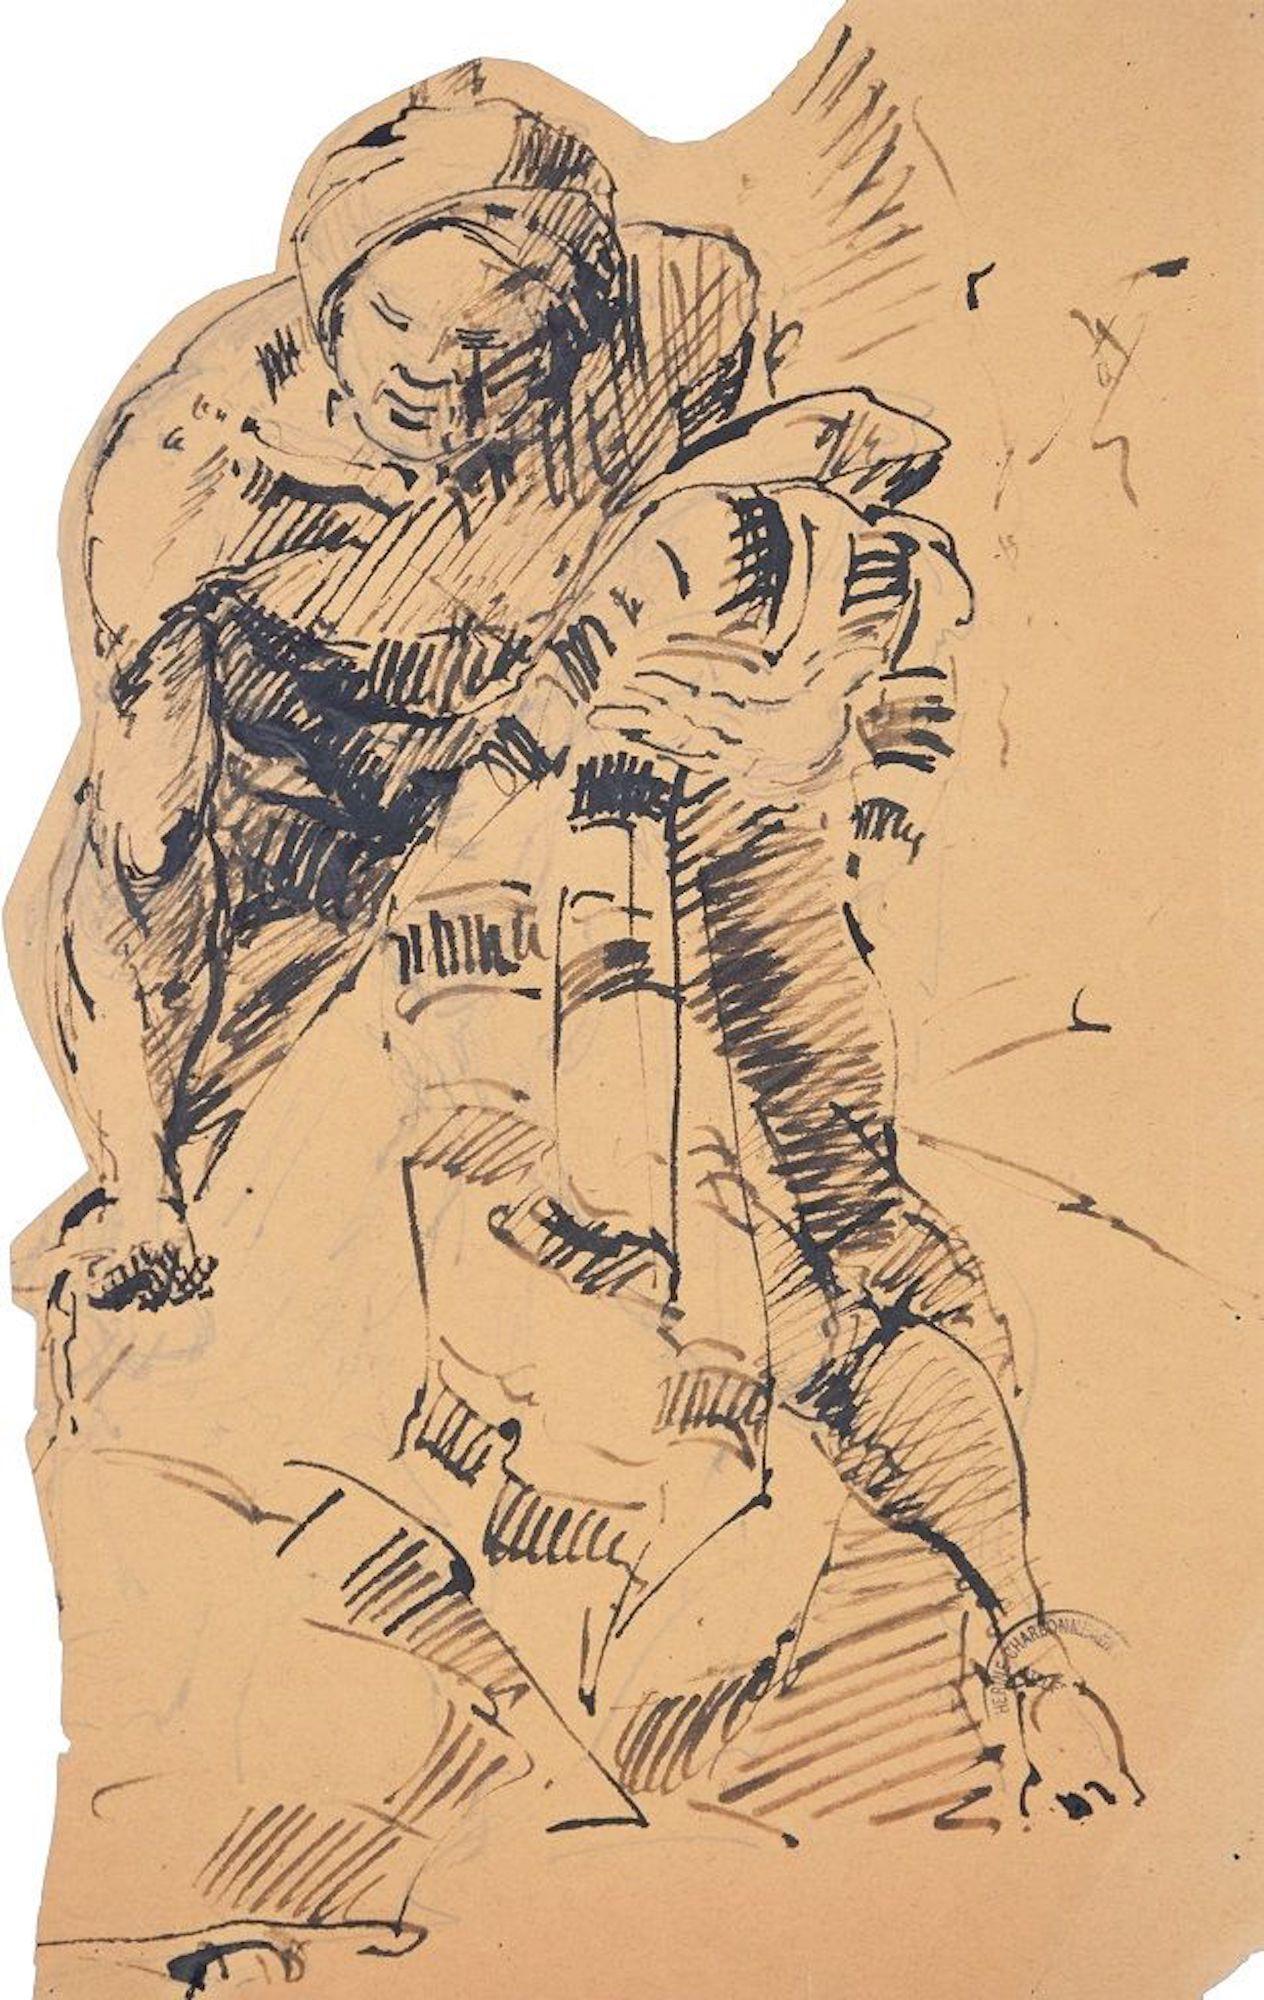 Embracing is an original pen drawing on ivory paper, realized by the French artist Paul Garin (Nice, 1898-1963) in the 1950s. 

Black ink stamp on the higher-right corner: "Catherine Charbonneux Commissaire Priseur - Atelier Garin".

The artwork